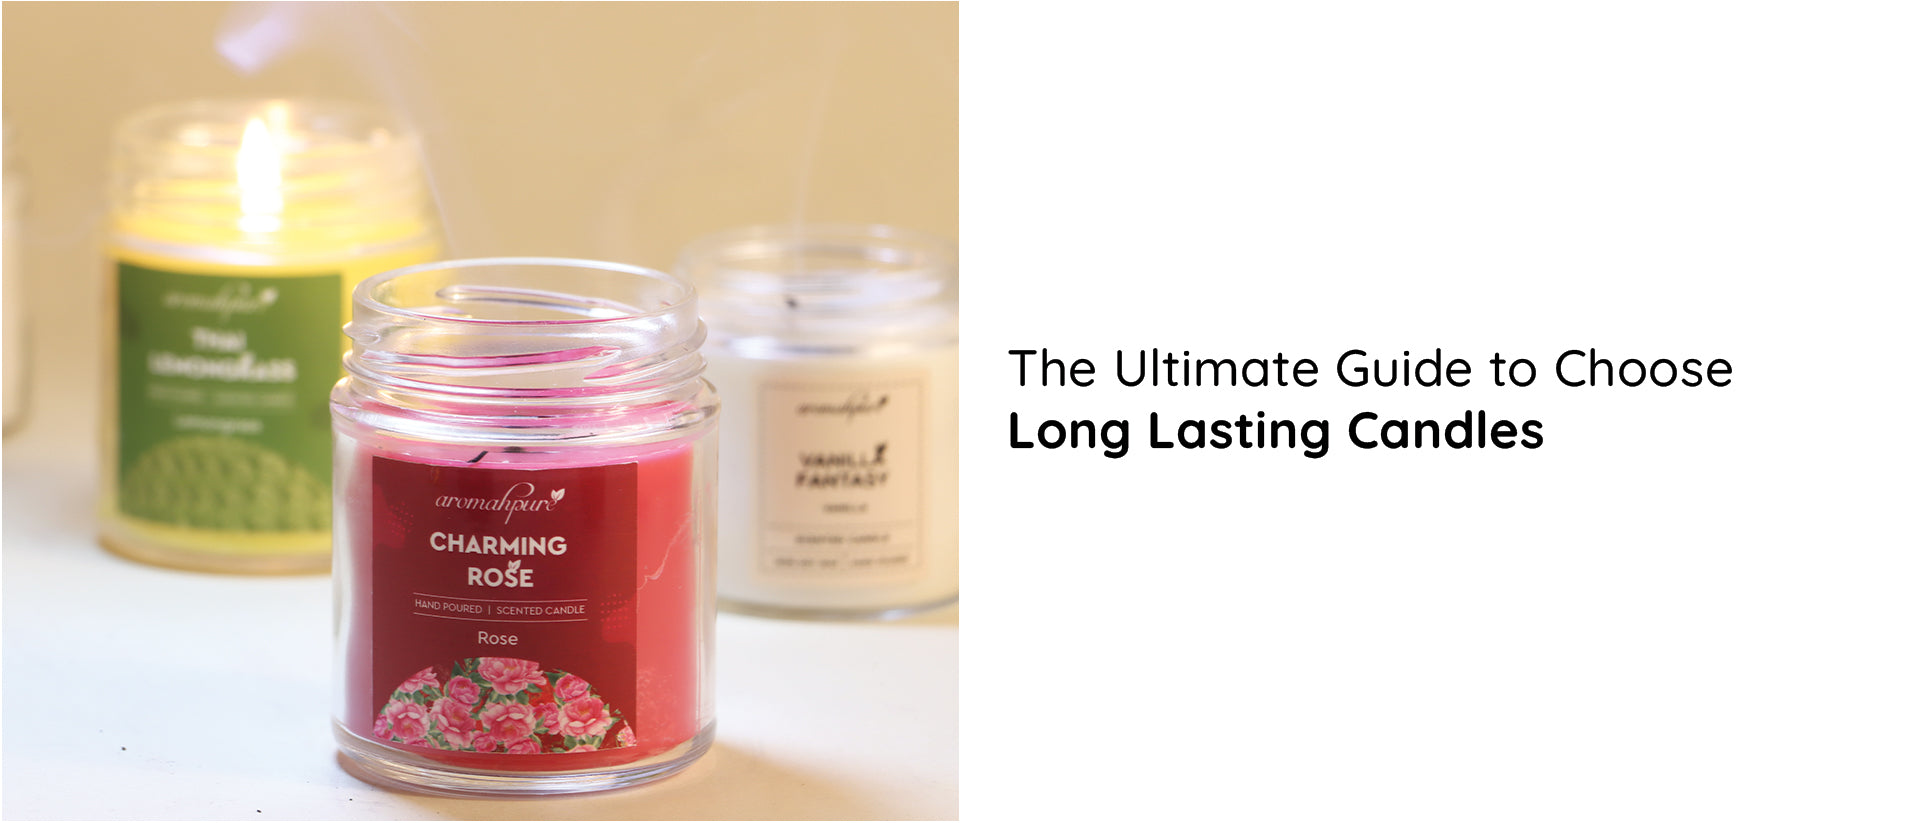 The Ultimate Guide to Choose Long Lasting Candle